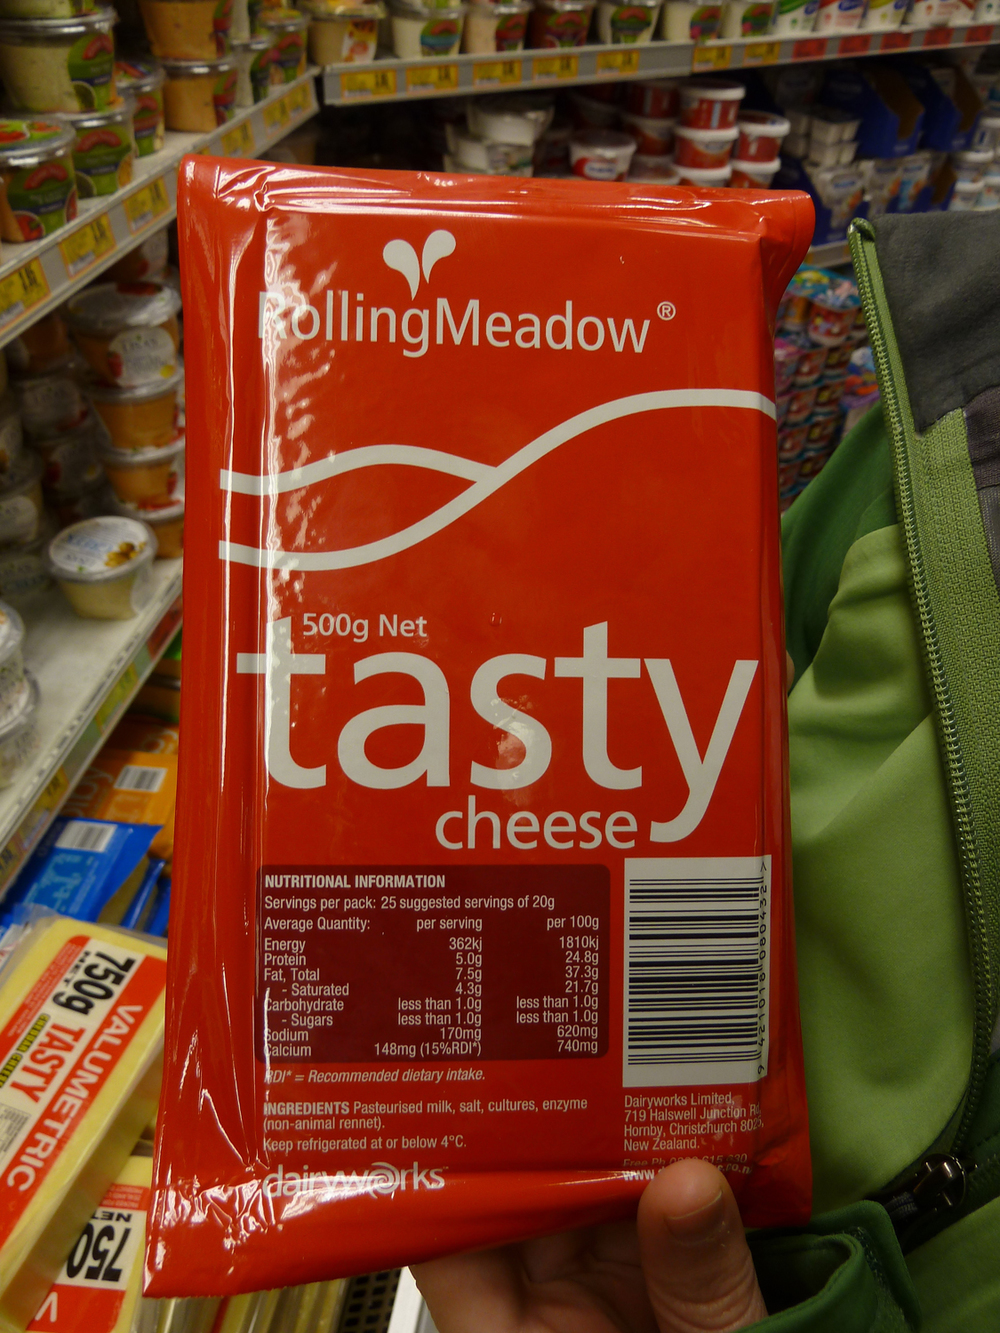 That's Right! This Brand Of Cheese Is Tasty.